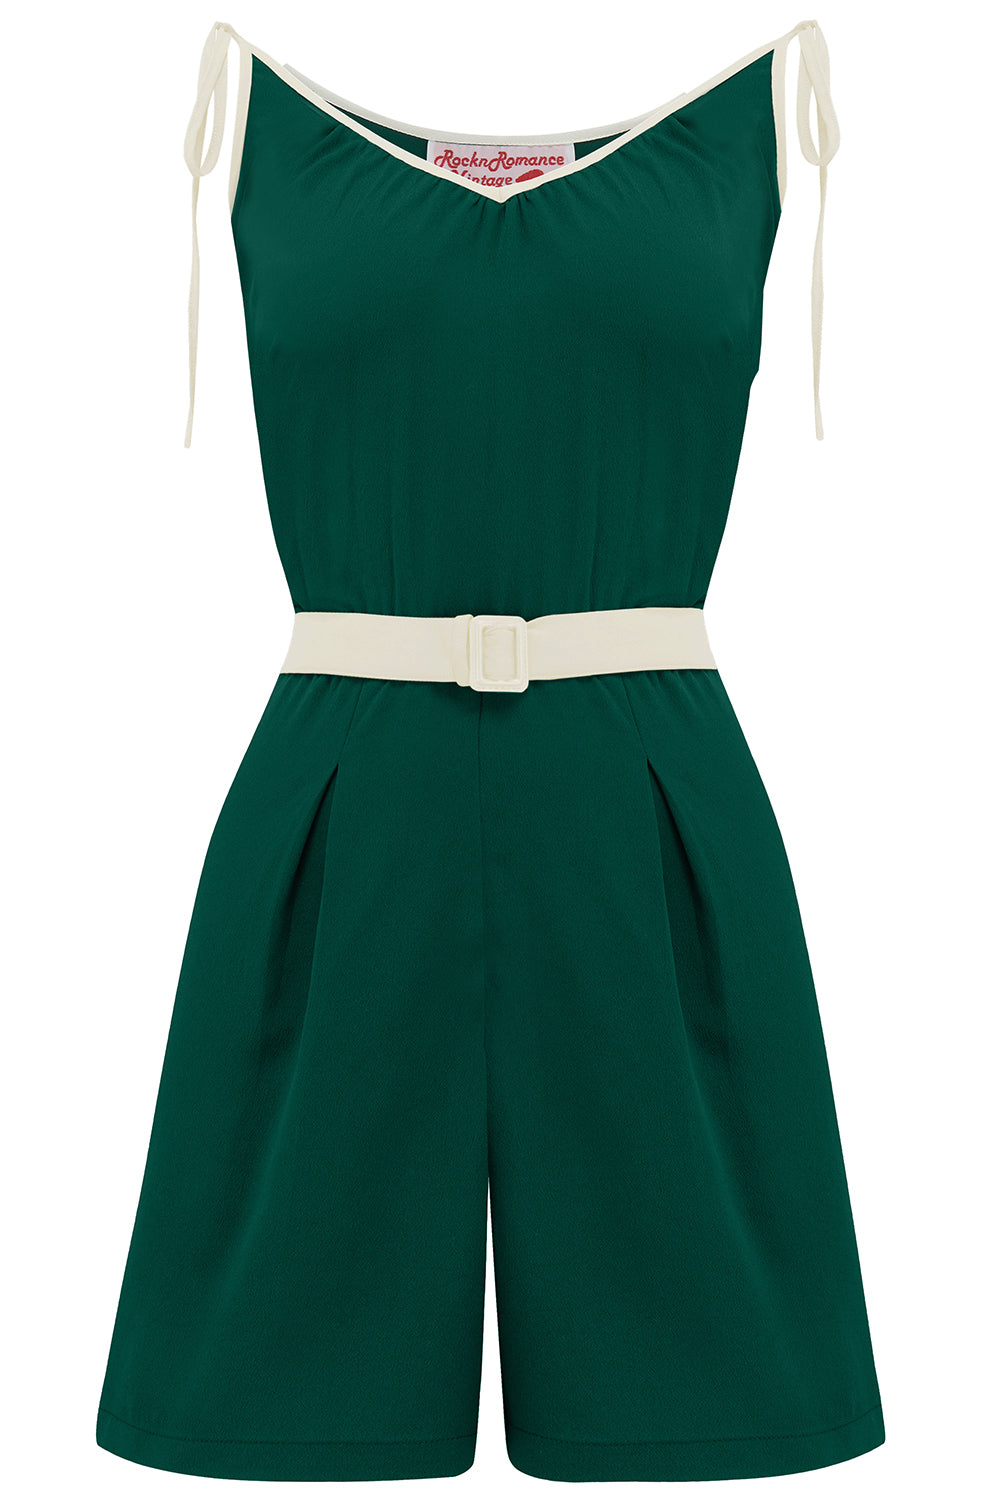 The "Marcie" Beach Playsuit / Romper in Green With Ivory Contrasts, True & Authentic 1950s Vintage Style - True and authentic vintage style clothing, inspired by the Classic styles of CC41 , WW2 and the fun 1950s RocknRoll era, for everyday wear plus events like Goodwood Revival, Twinwood Festival and Viva Las Vegas Rockabilly Weekend Rock n Romance Rock n Romance